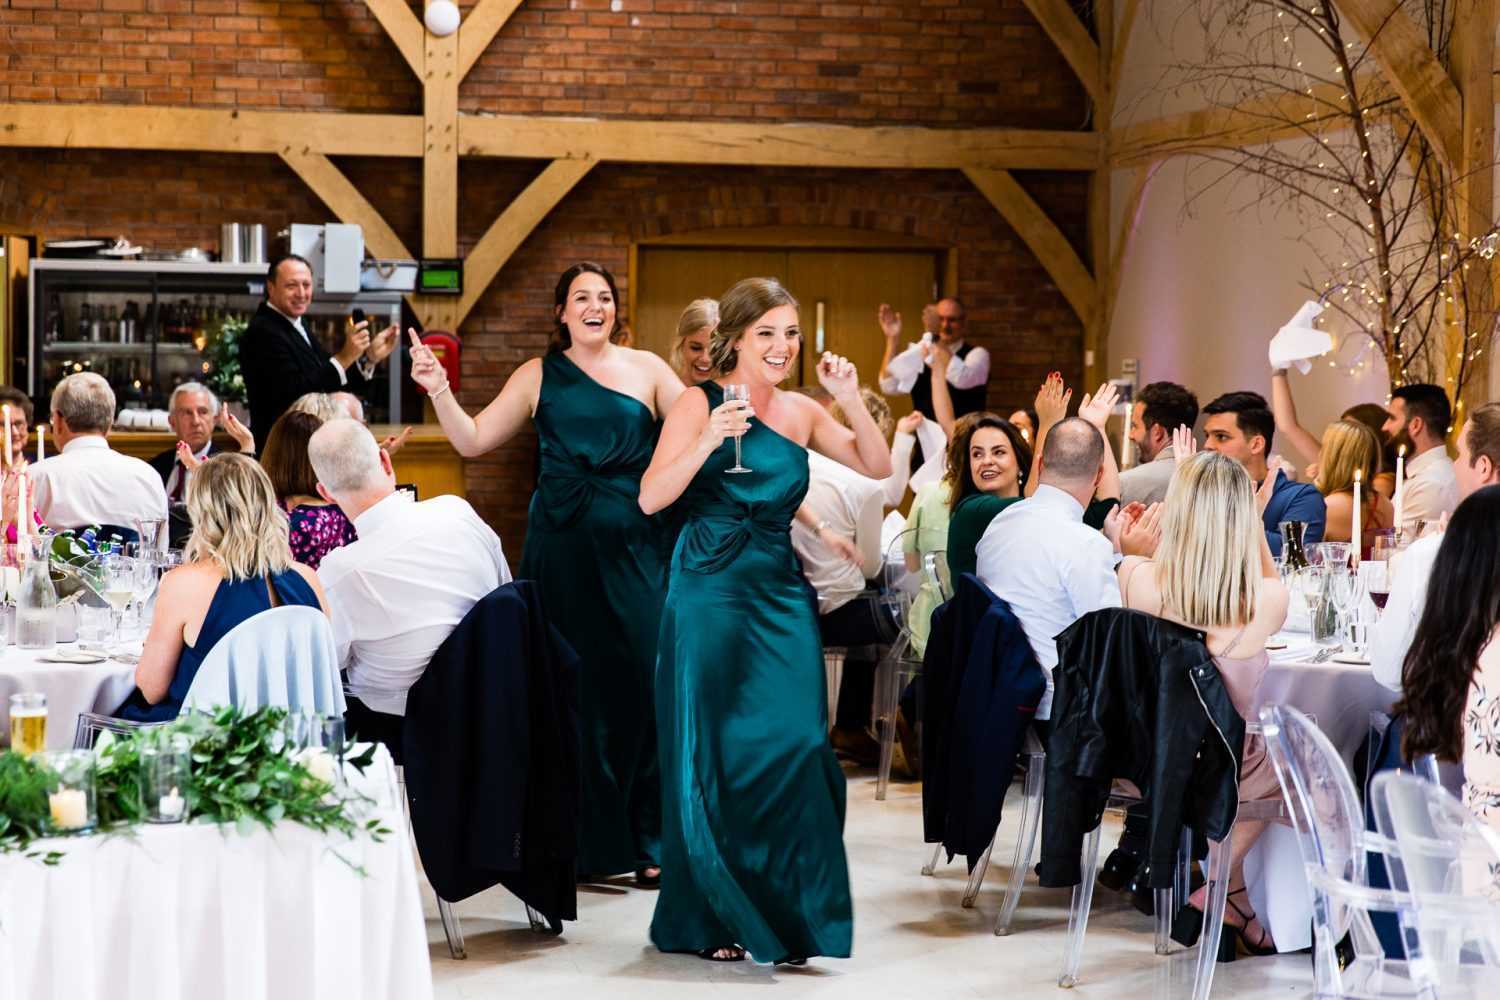 Laura & James's West Midlands Wedding Photographer at Redhouse Barn